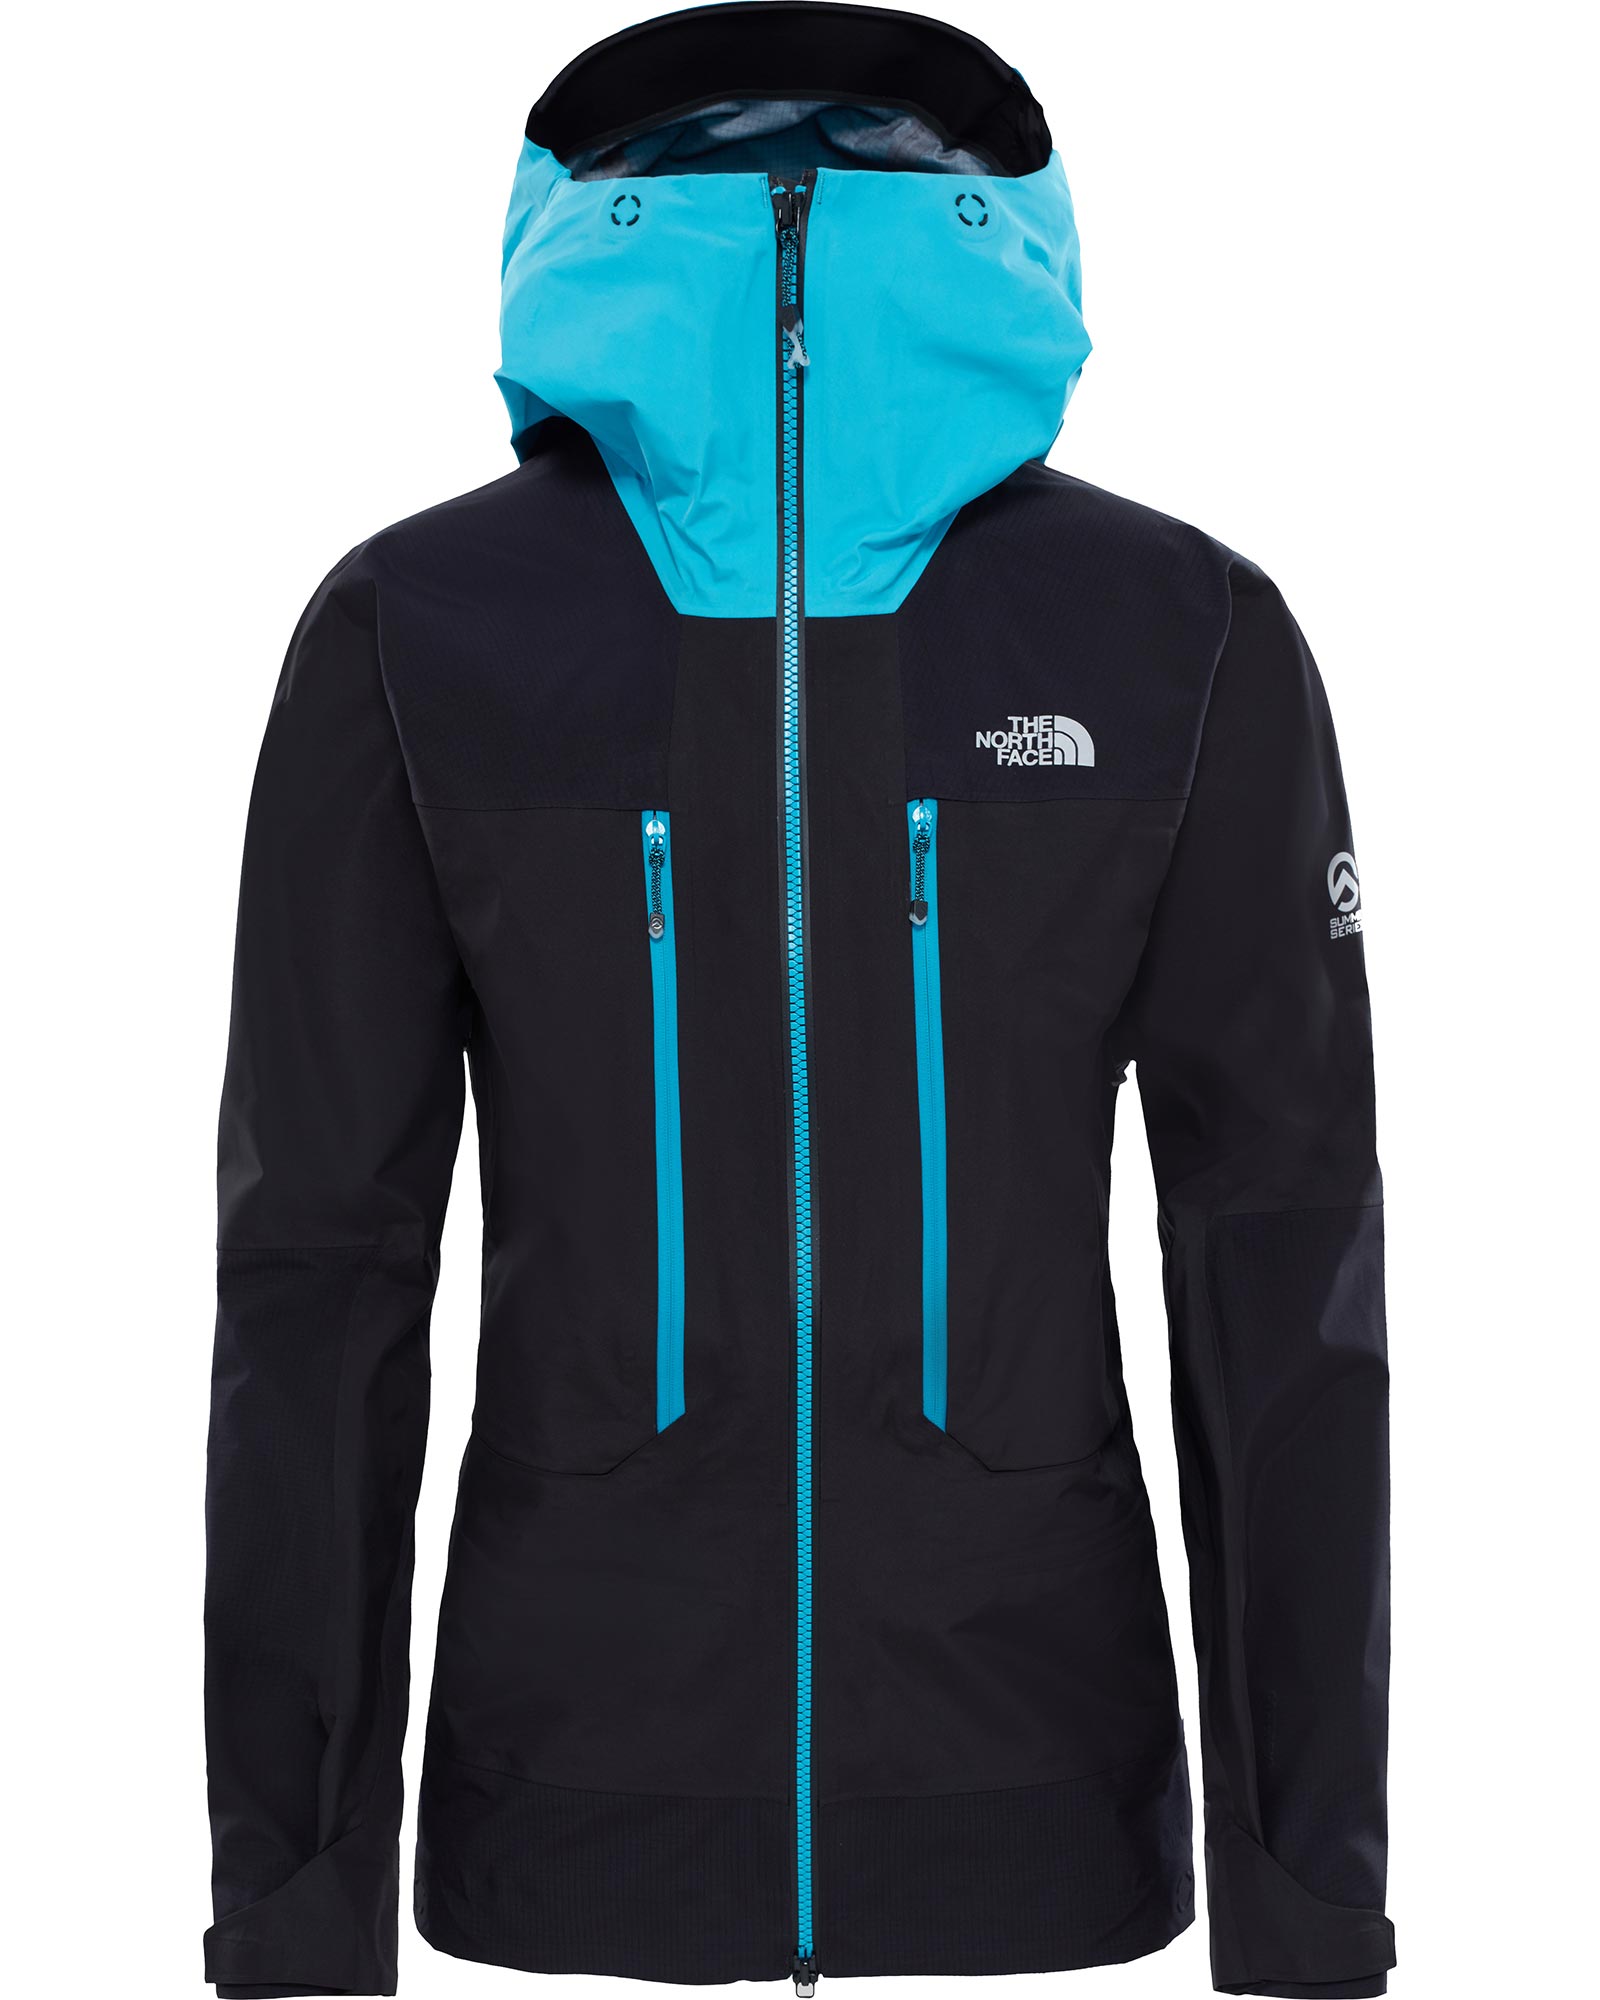 The North Face Summit Series L5 Gore-tex Pro Womens Jacket